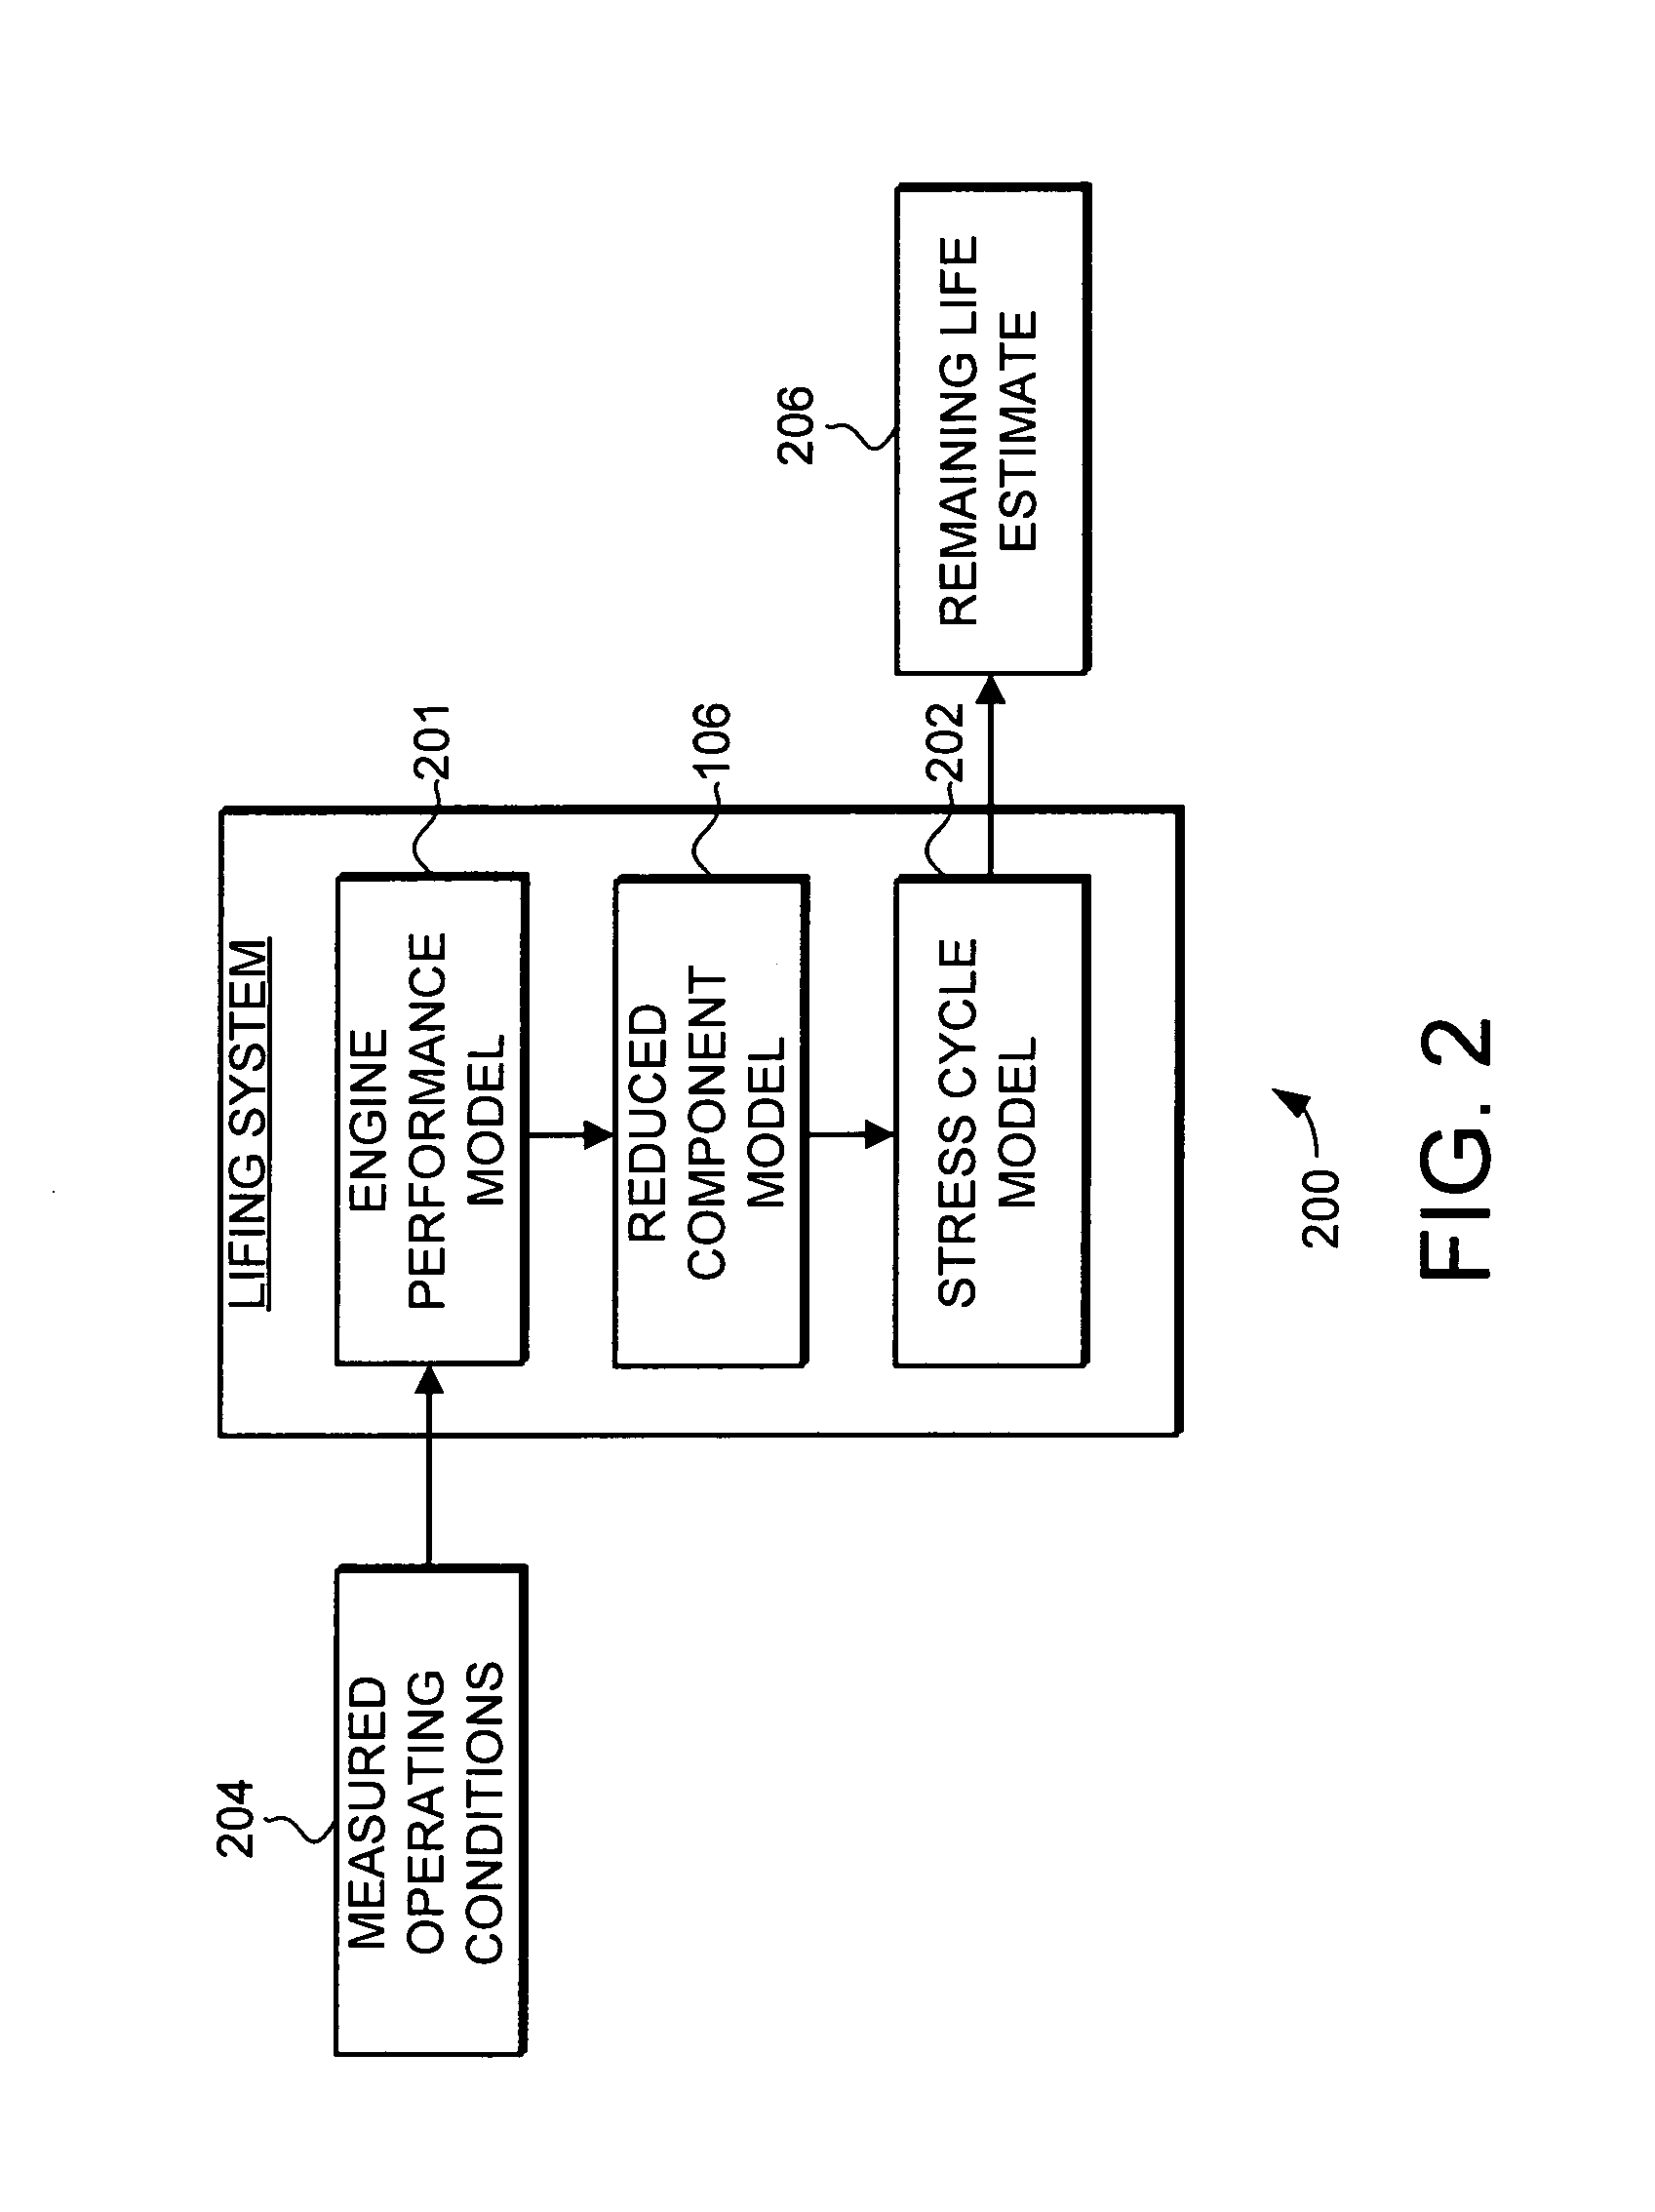 Model reduction system and method for component lifing